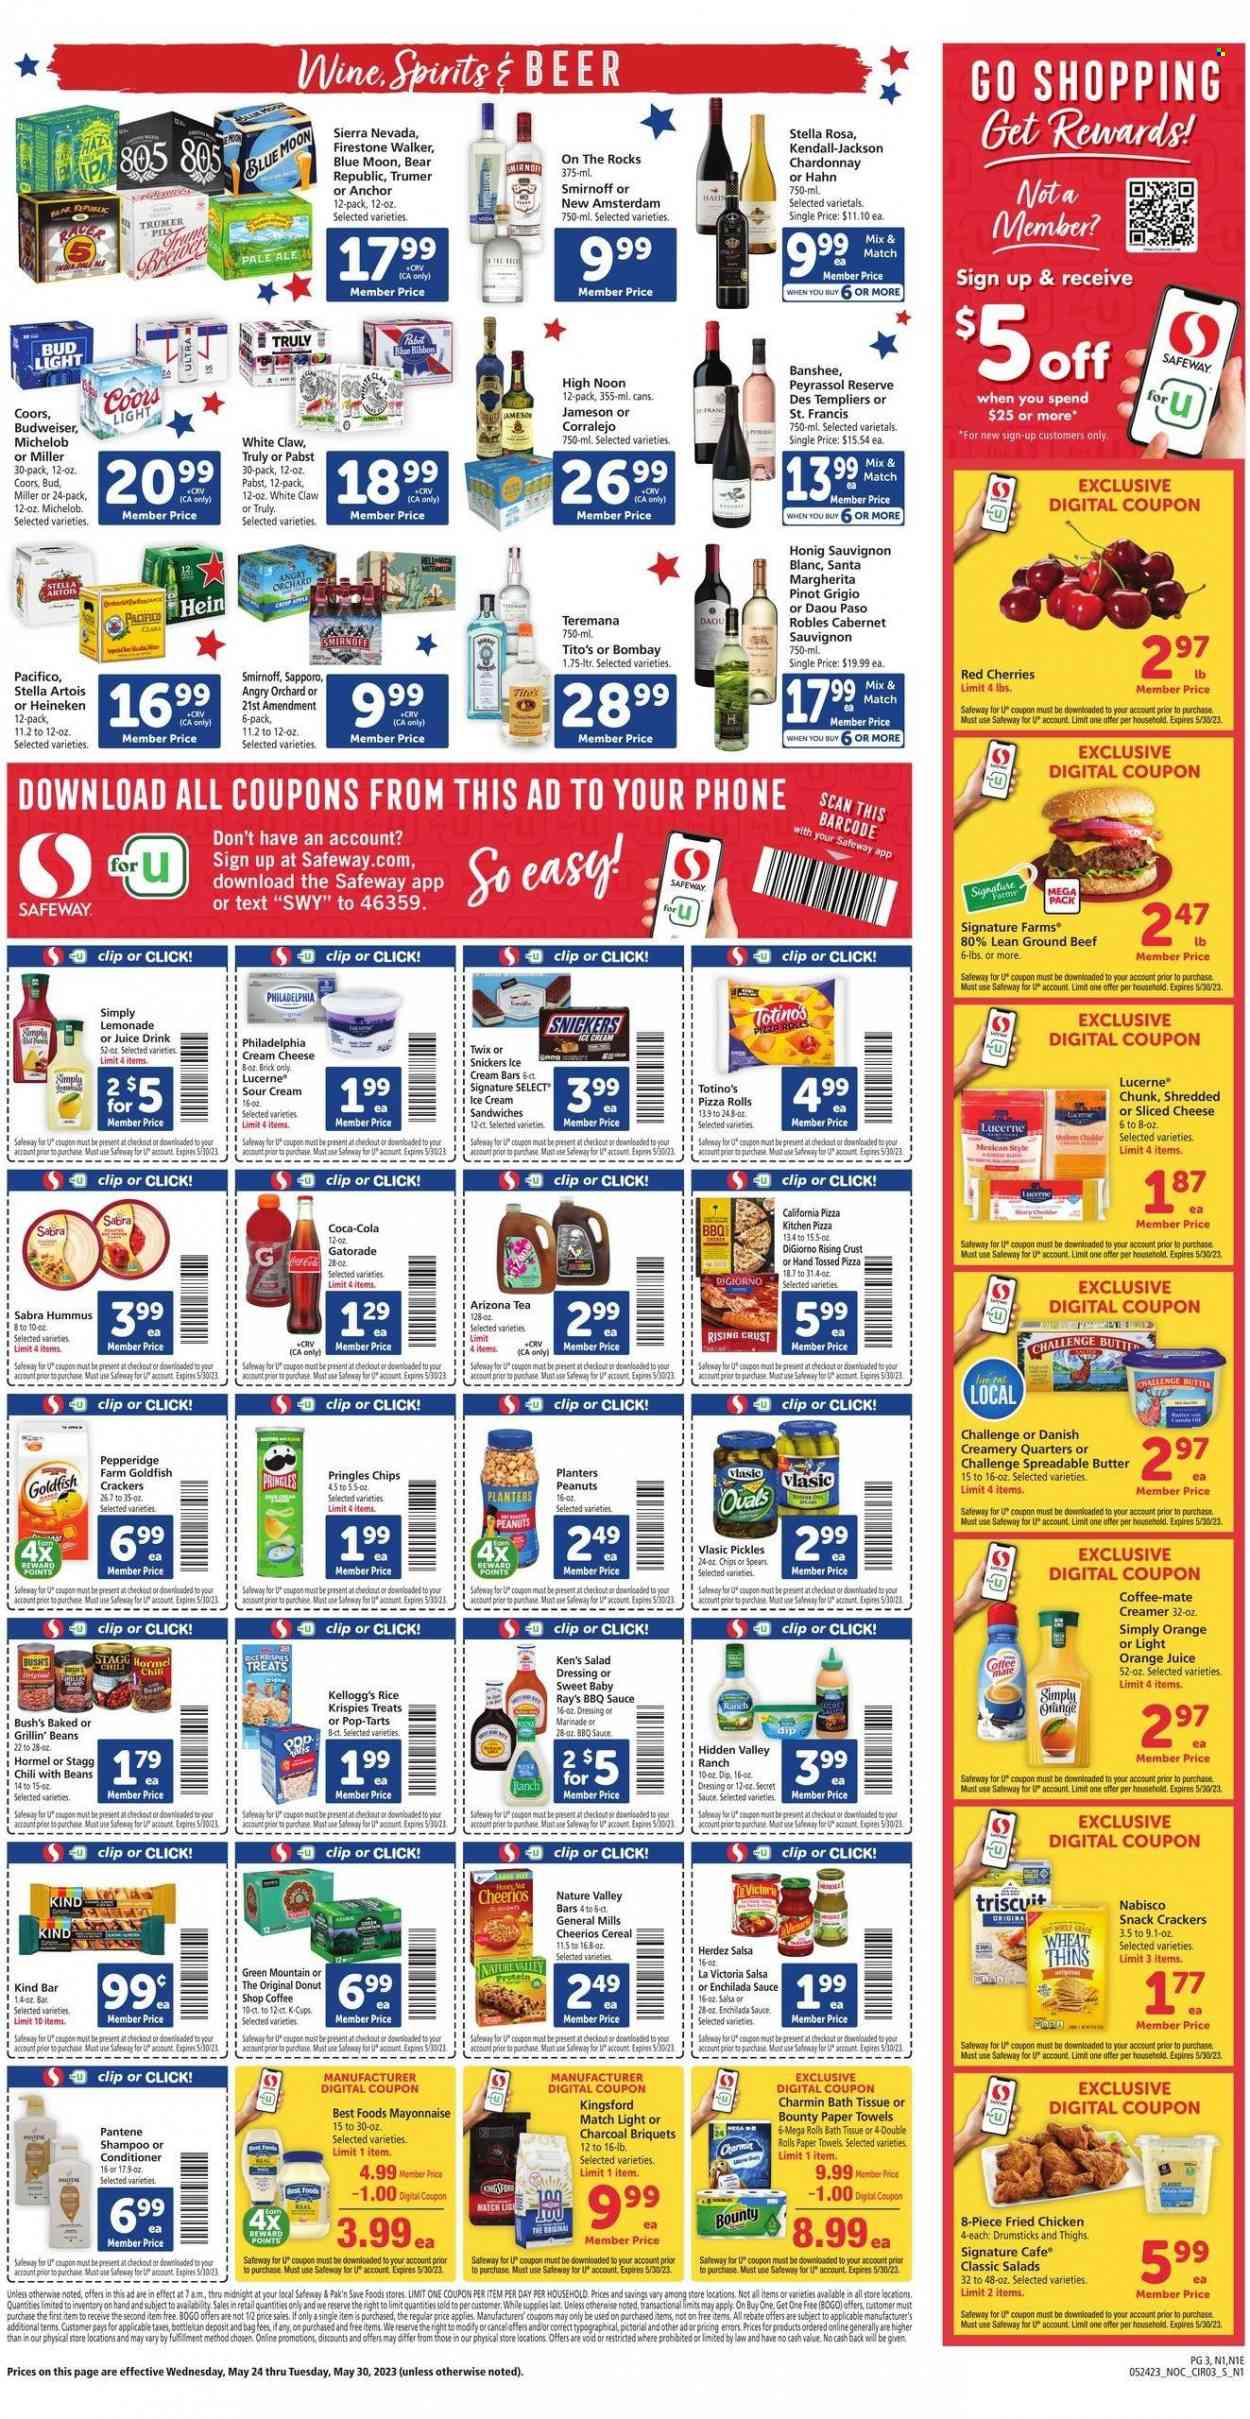 thumbnail - Safeway Flyer - 05/24/2023 - 05/30/2023 - Sales products - pizza rolls, tart, cherries, beef meat, ground beef, sauce, Hormel, Kingsford, ready meal, cream cheese, shredded cheese, sliced cheese, Philadelphia, cheese, Coffee-Mate, Anchor, spreadable butter, sour cream, creamer, mayonnaise, dip, ice cream, snack, Snickers, Twix, Bounty, cereal bar, crackers, Kellogg's, Santa, Pop-Tarts, Nabisco, Pringles, chips, Thins, Goldfish, salty snack, brewer, enchilada sauce, pickles, baked beans, cereals, Cheerios, Rice Krispies, Nature Valley, BBQ sauce, salad dressing, dressing, salsa, marinade, peanuts, Planters, Coca-Cola, lemonade, orange juice, juice, soft drink, AriZona, Gatorade, sparkling water, tea, coffee capsules, K-Cups, Green Mountain, Cabernet Sauvignon, red wine, white wine, Chardonnay, wine, alcohol, Pinot Grigio, Sauvignon Blanc, Smirnoff, whiskey, Jameson, White Claw, Hard Seltzer, TRULY, beer, Stella Artois, Bud Light, Heineken, Sol, Hahn, Firestone Walker, Pabst Blue Ribbon, Pabst, bath tissue, kitchen towels, paper towels, Charmin, shampoo, conditioner, Pantene, briquettes, electrolyte drink, Budweiser, Coors, Blue Moon, Michelob. Page 3.